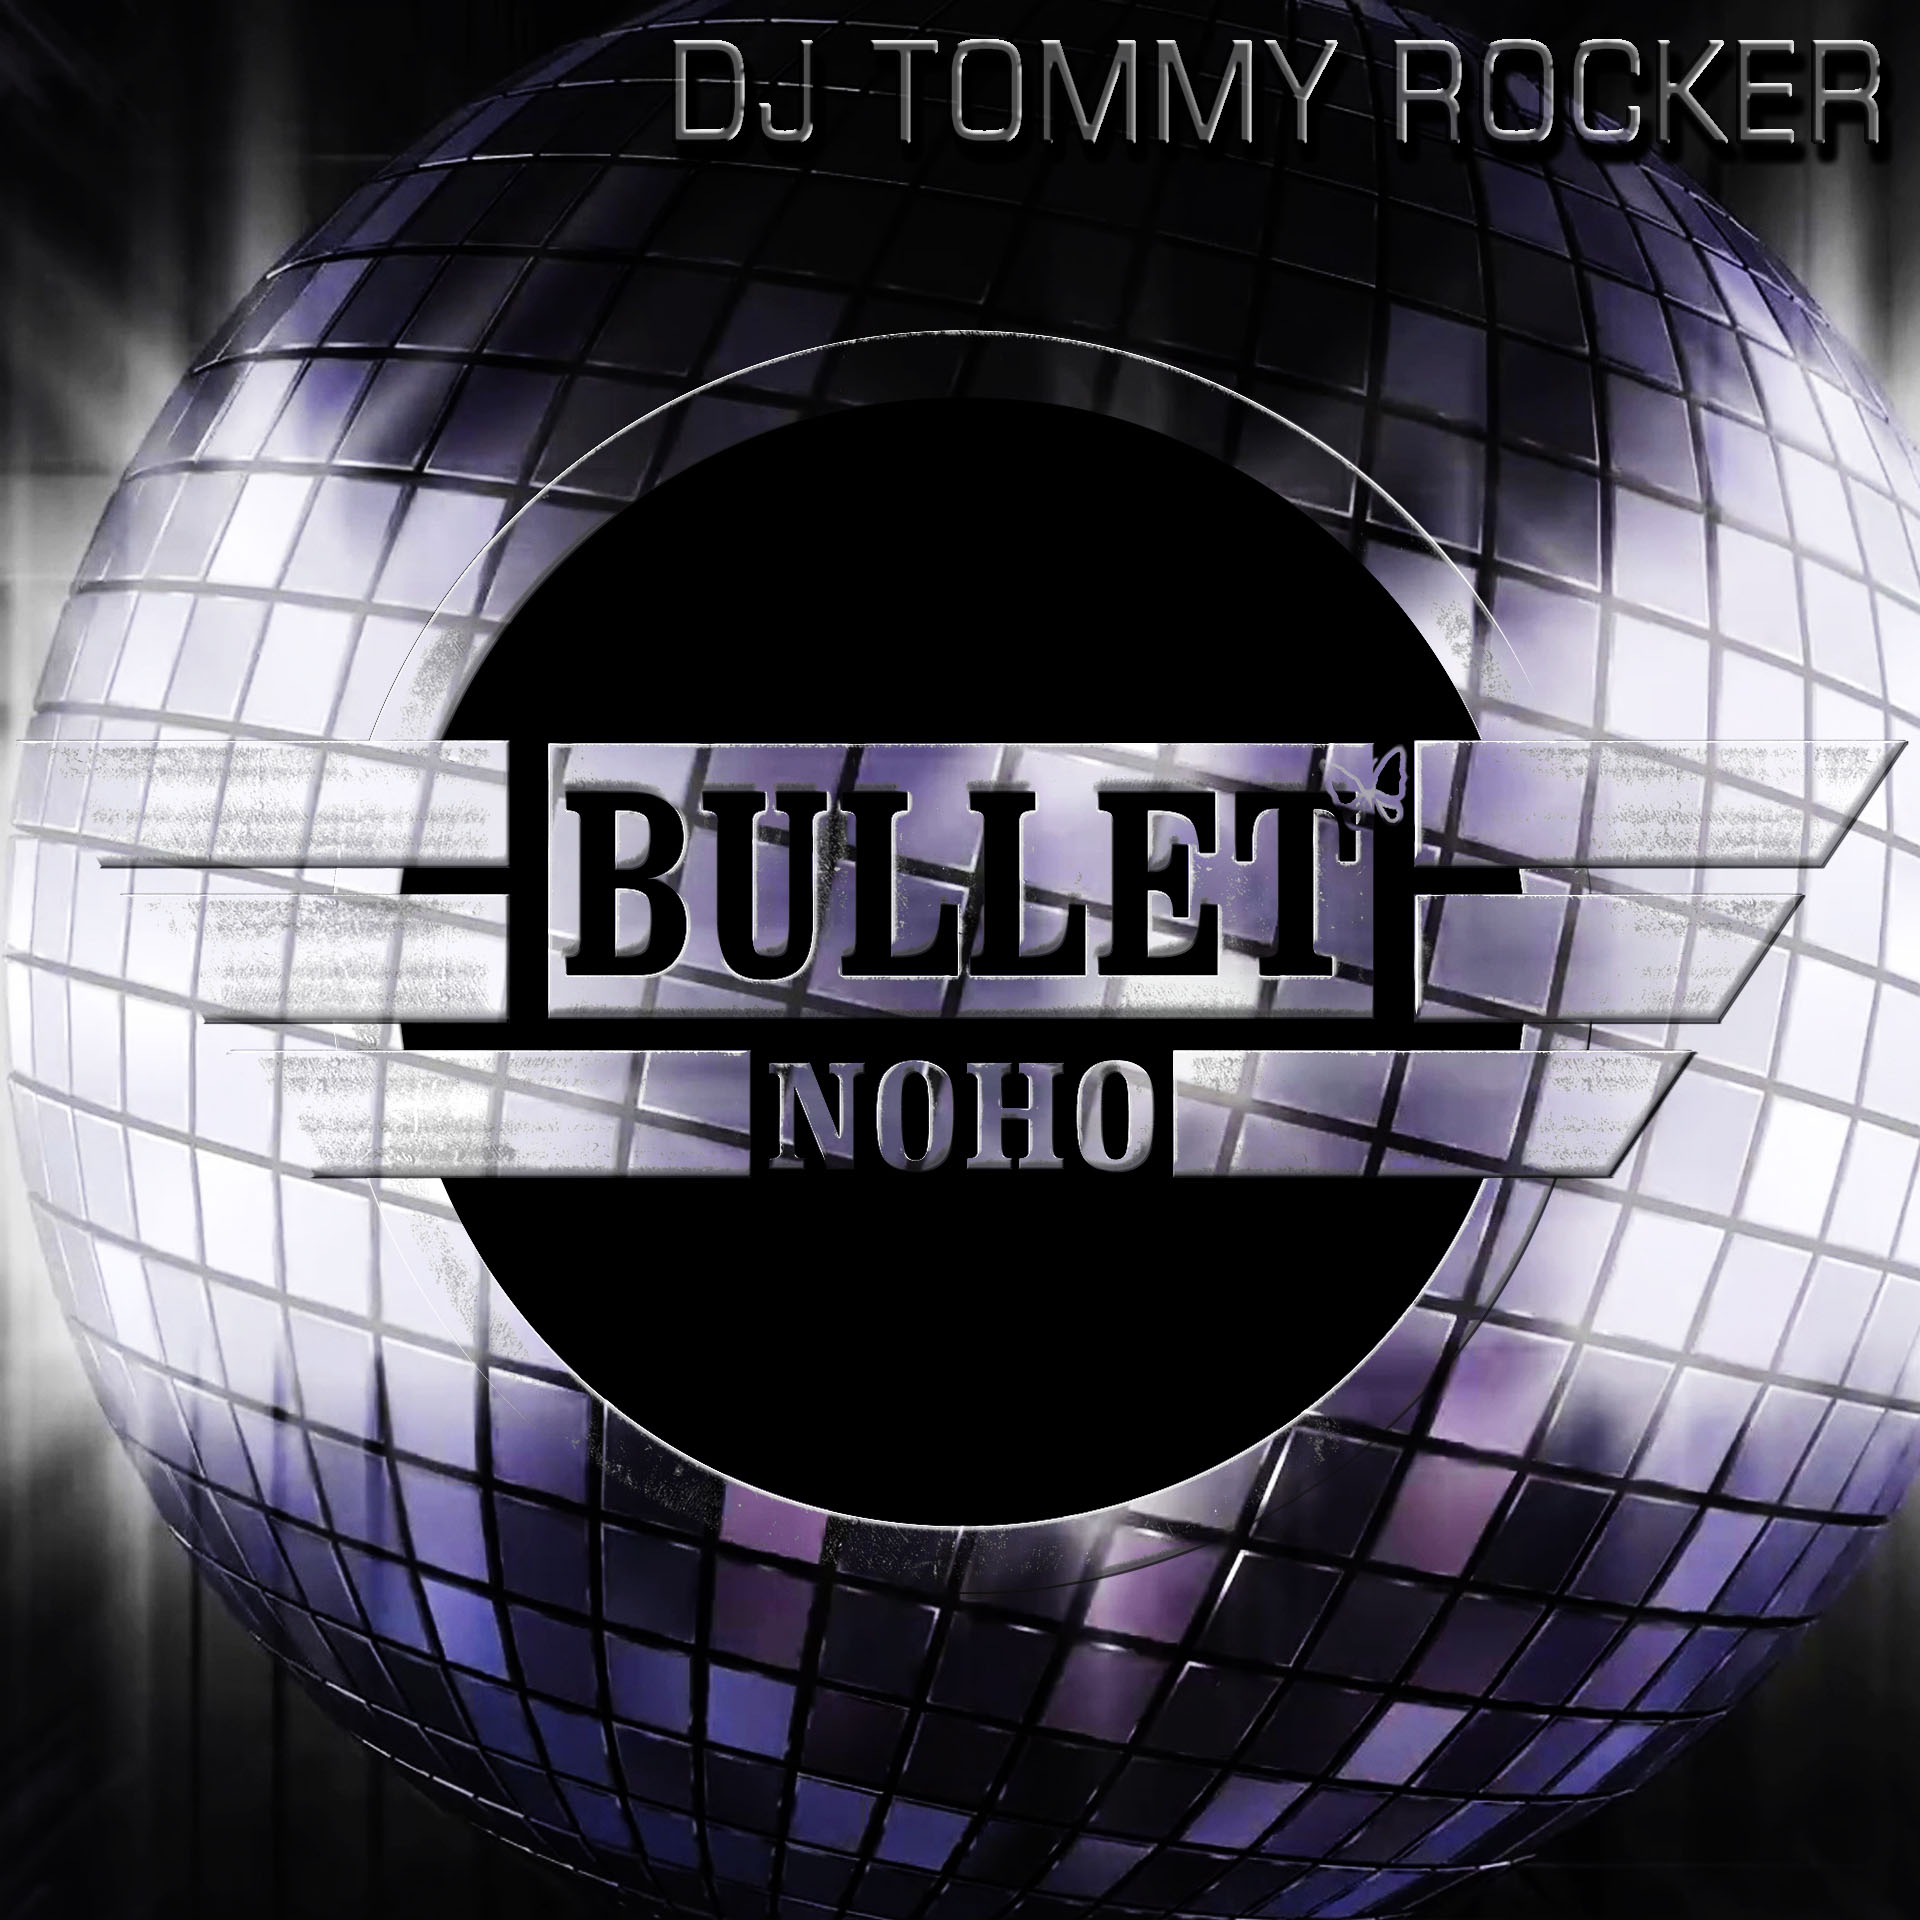 DJ TOMMY ROCKER: Saturday, November 27, 2021 from 8:00 PM to 2:00 AM